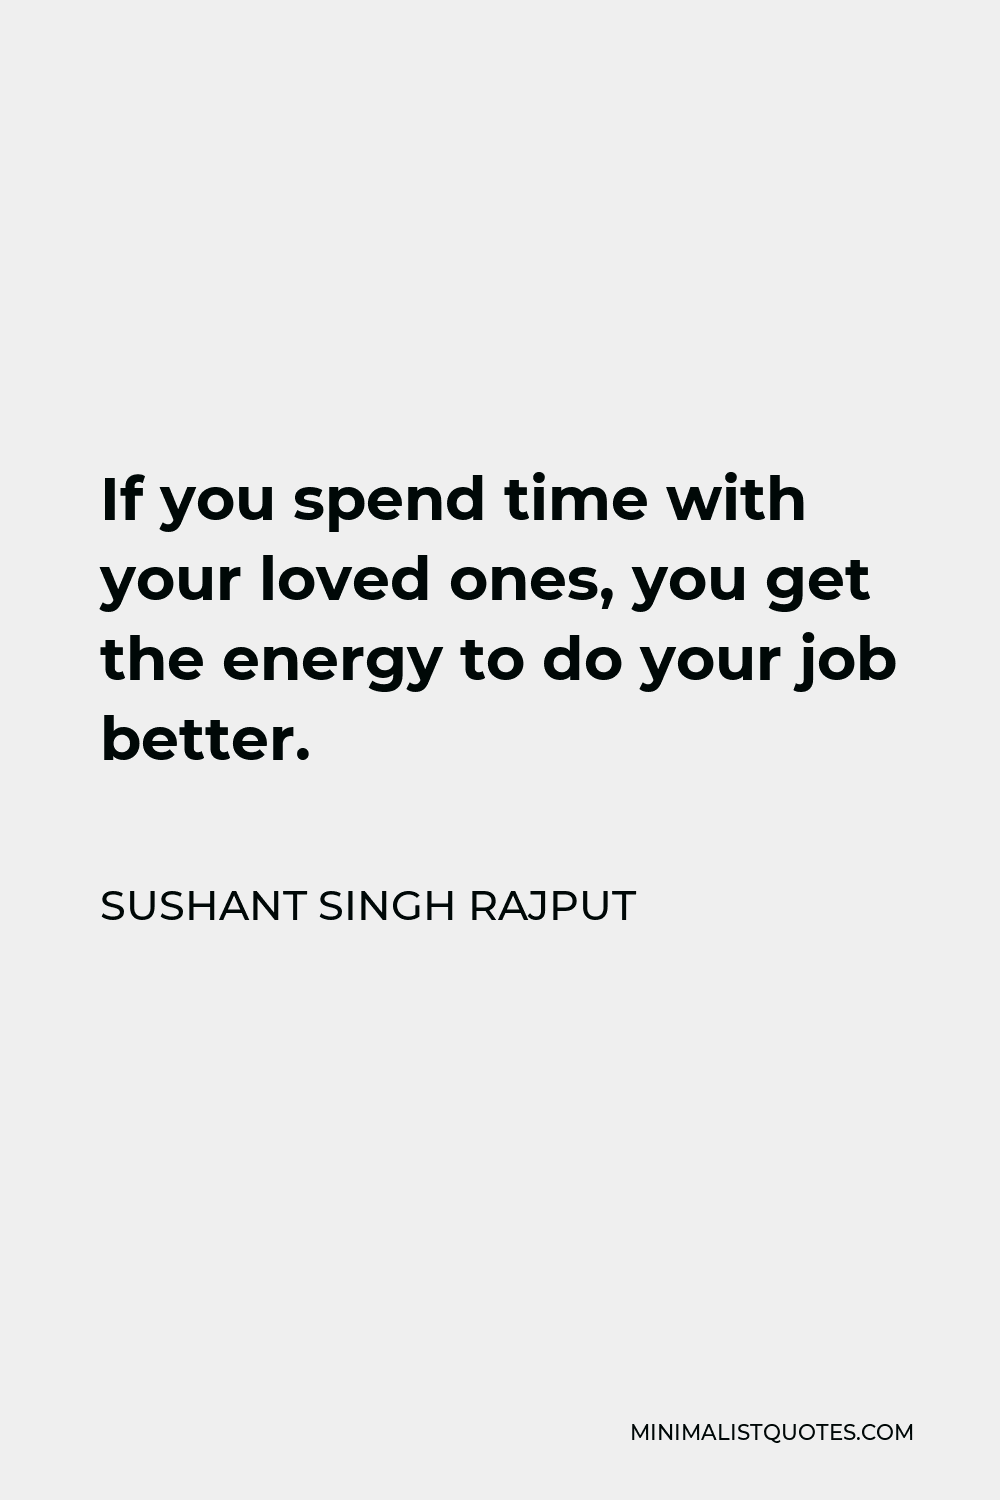 Sushant Singh Rajput Quote - If you spend time with your loved ones, you get the energy to do your job better.